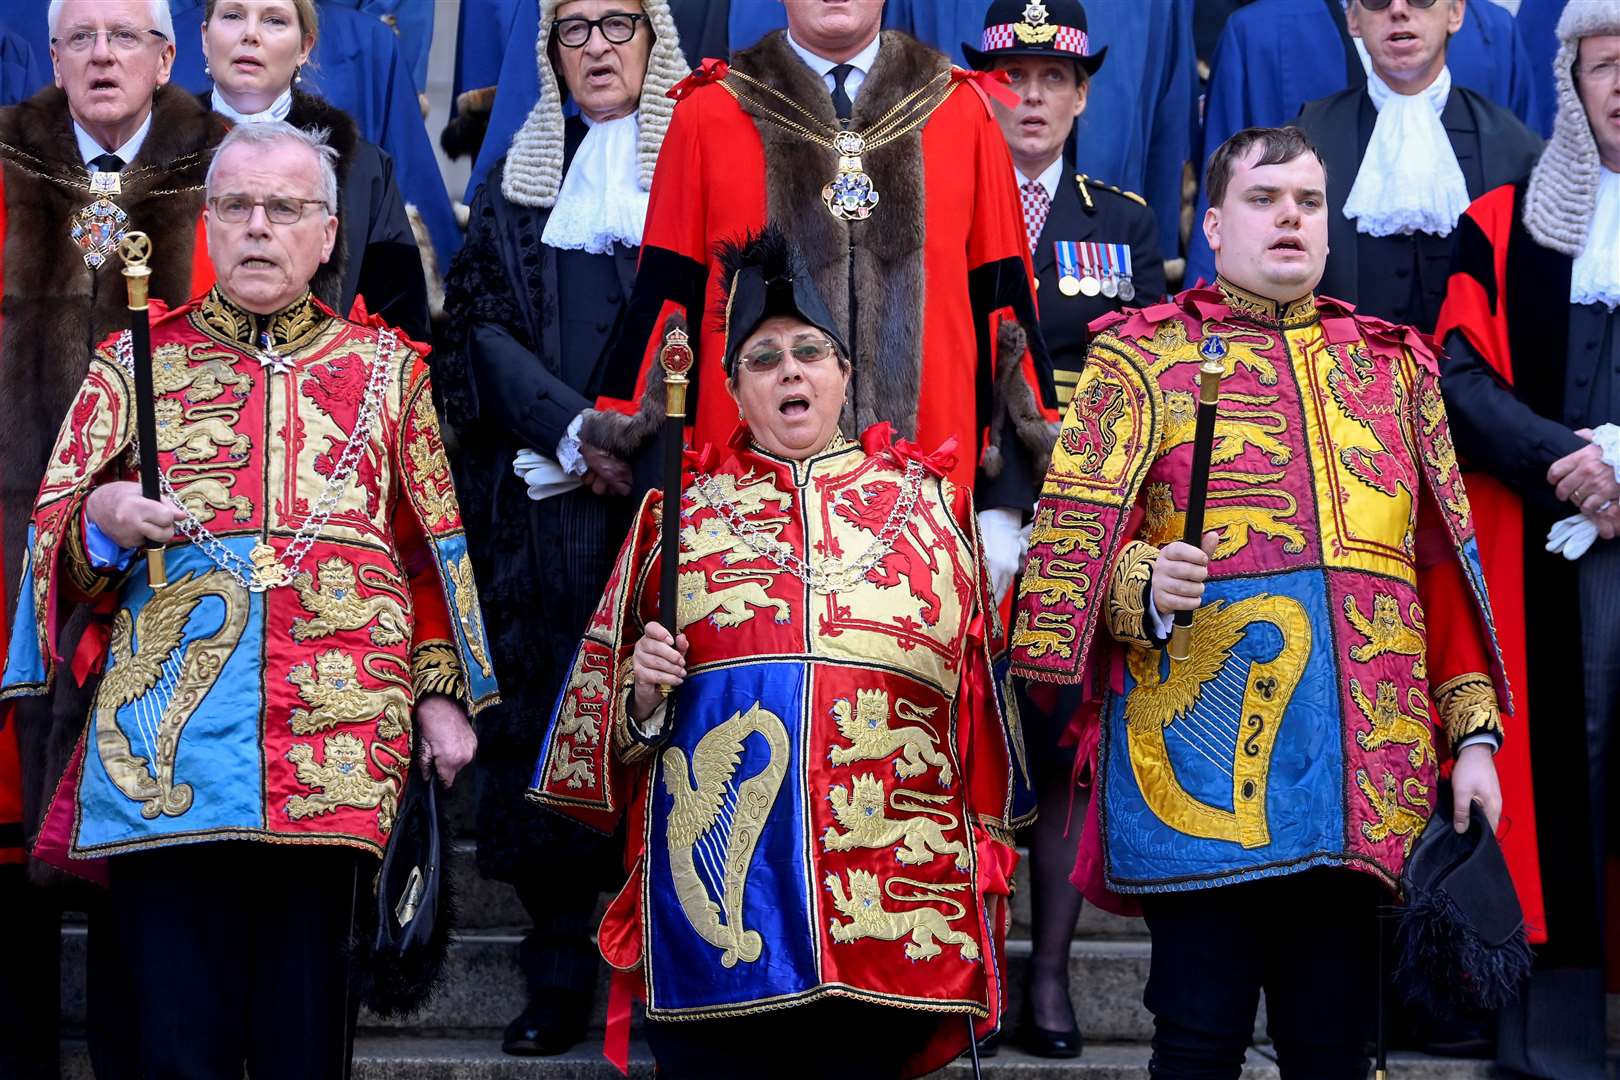 Ceremonial robes were seen on some of those in attendance at the Royal Exchange (Toby Melville/PA)